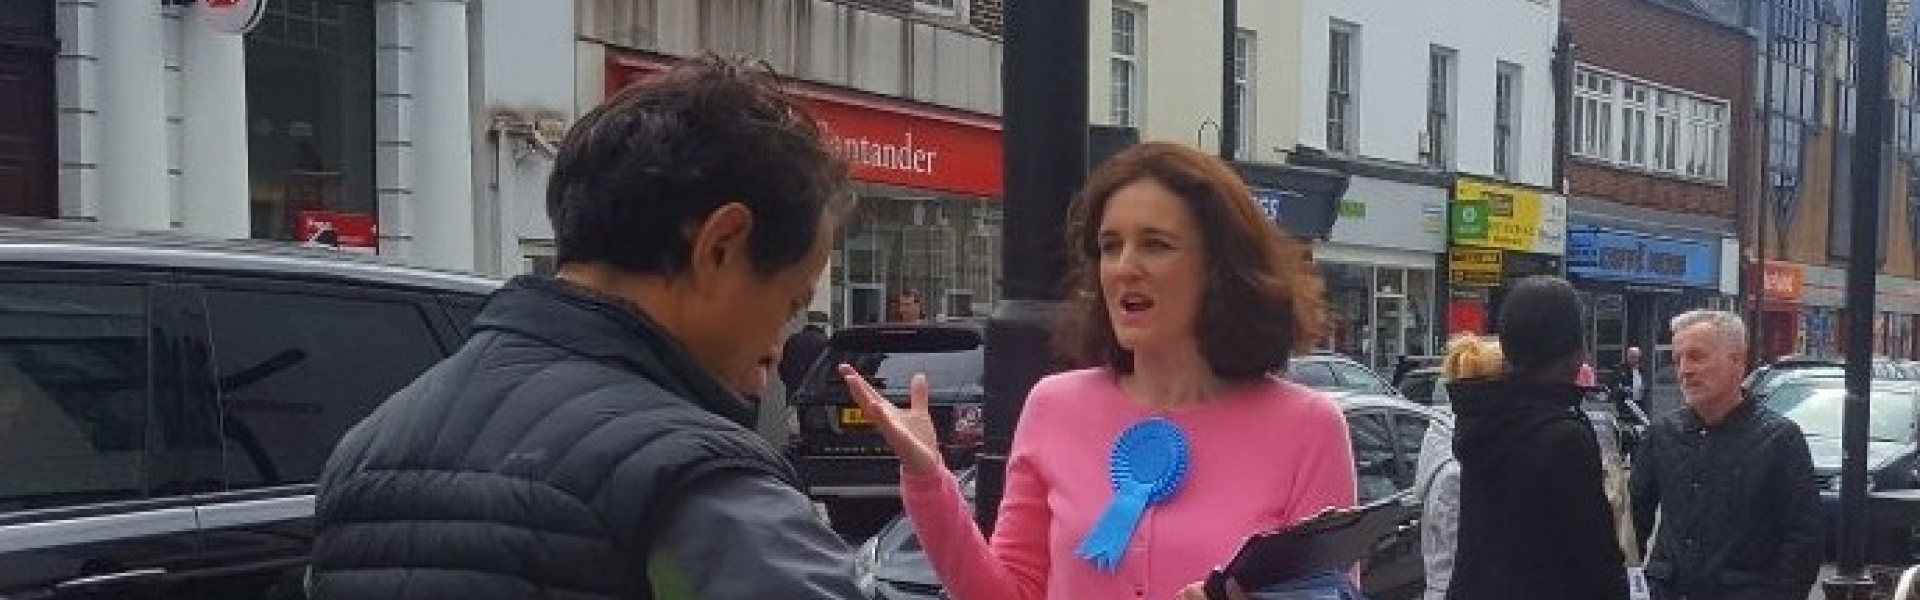 Theresa Villiers election 2017